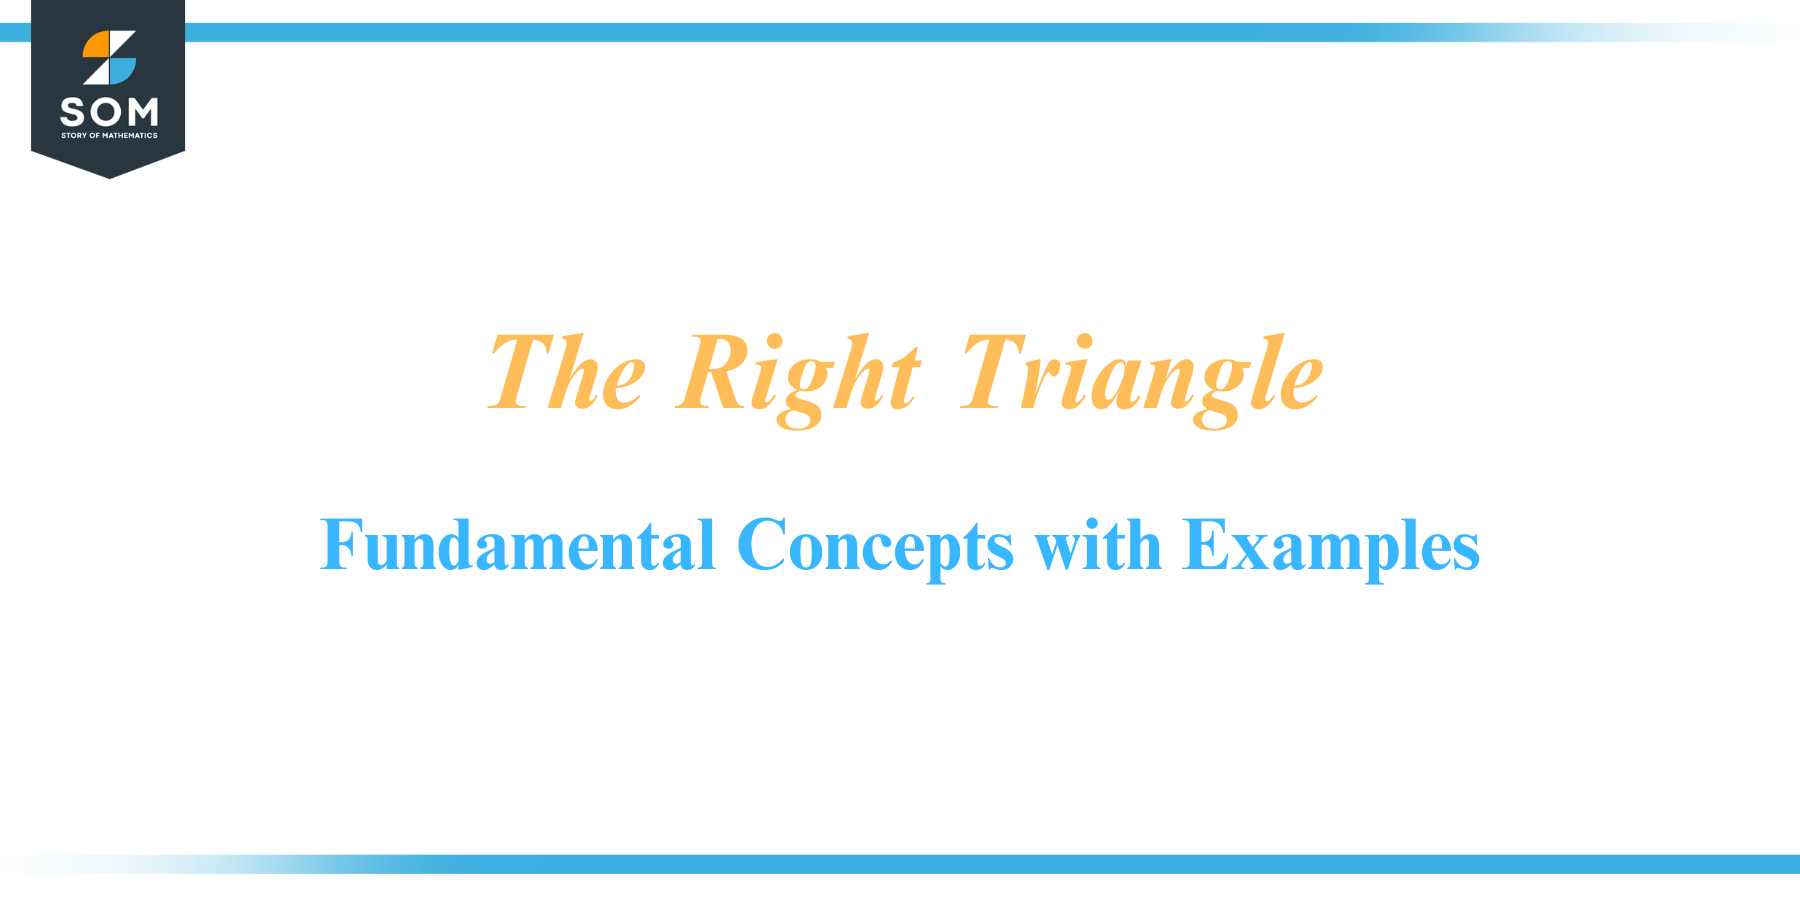 The Right Triangle Fundamental Concepts and